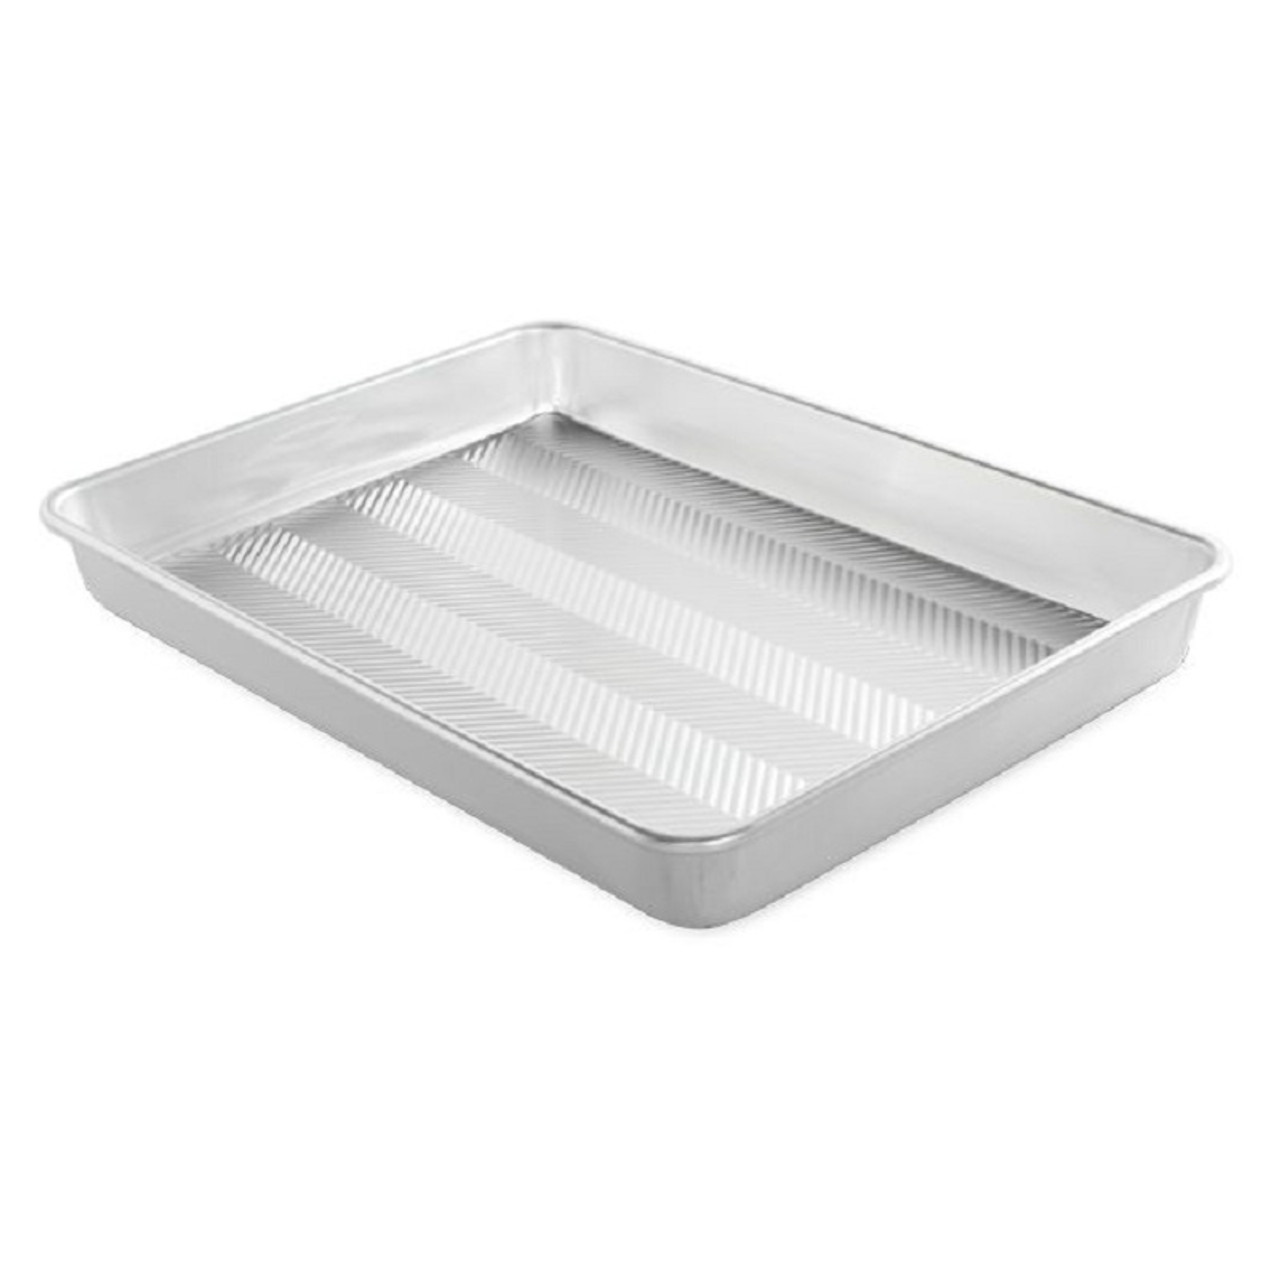 NordicWare Natural Prism Collection - High Sided Baking Sheet Pan - 13" x 18" (NW 44770)